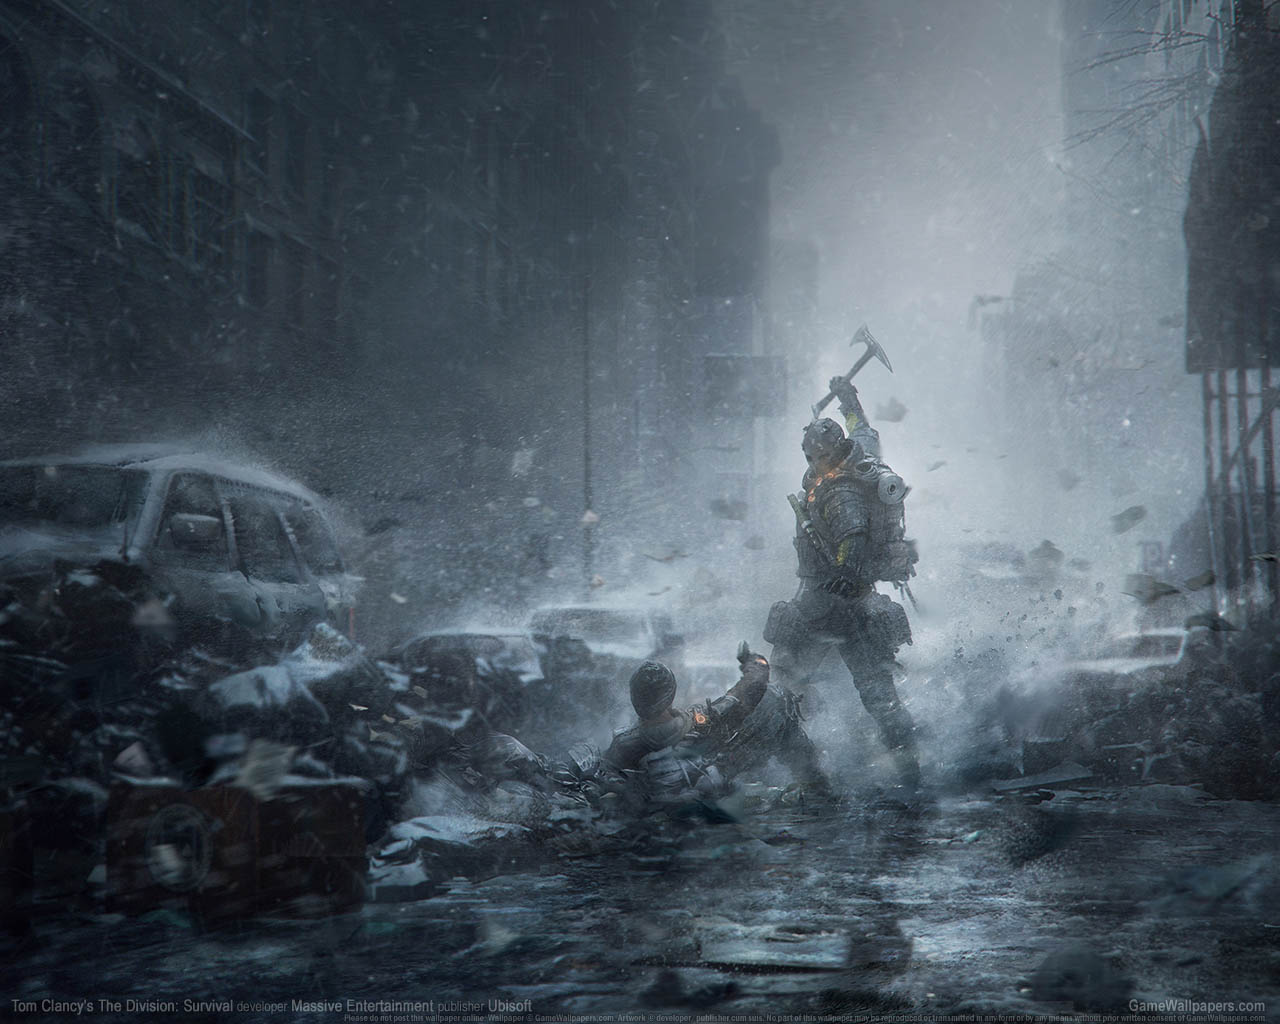 Tom Clancy's The Division: Survivalνmmer=02 wallpaper  1280x1024